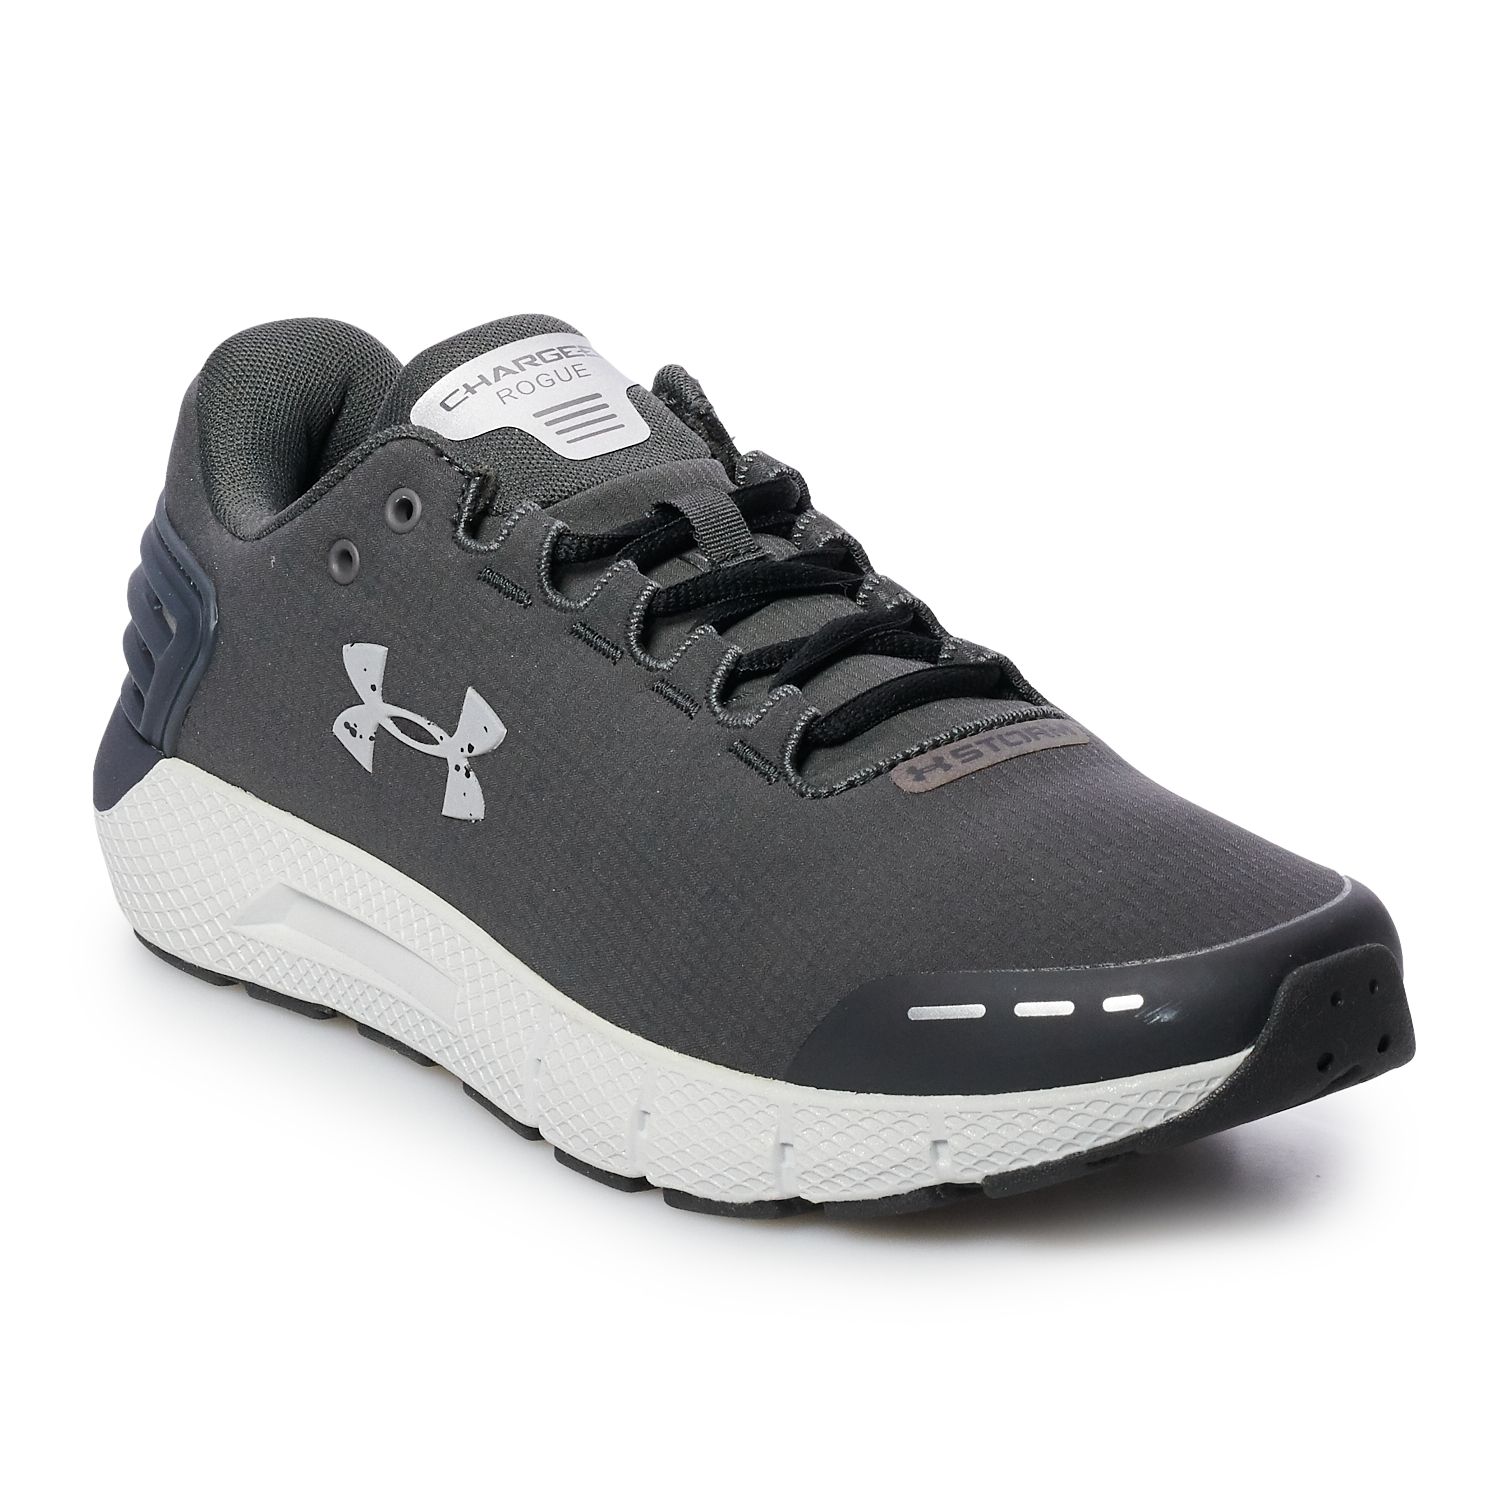 Under Armour Charged Rogue Storm Men's 